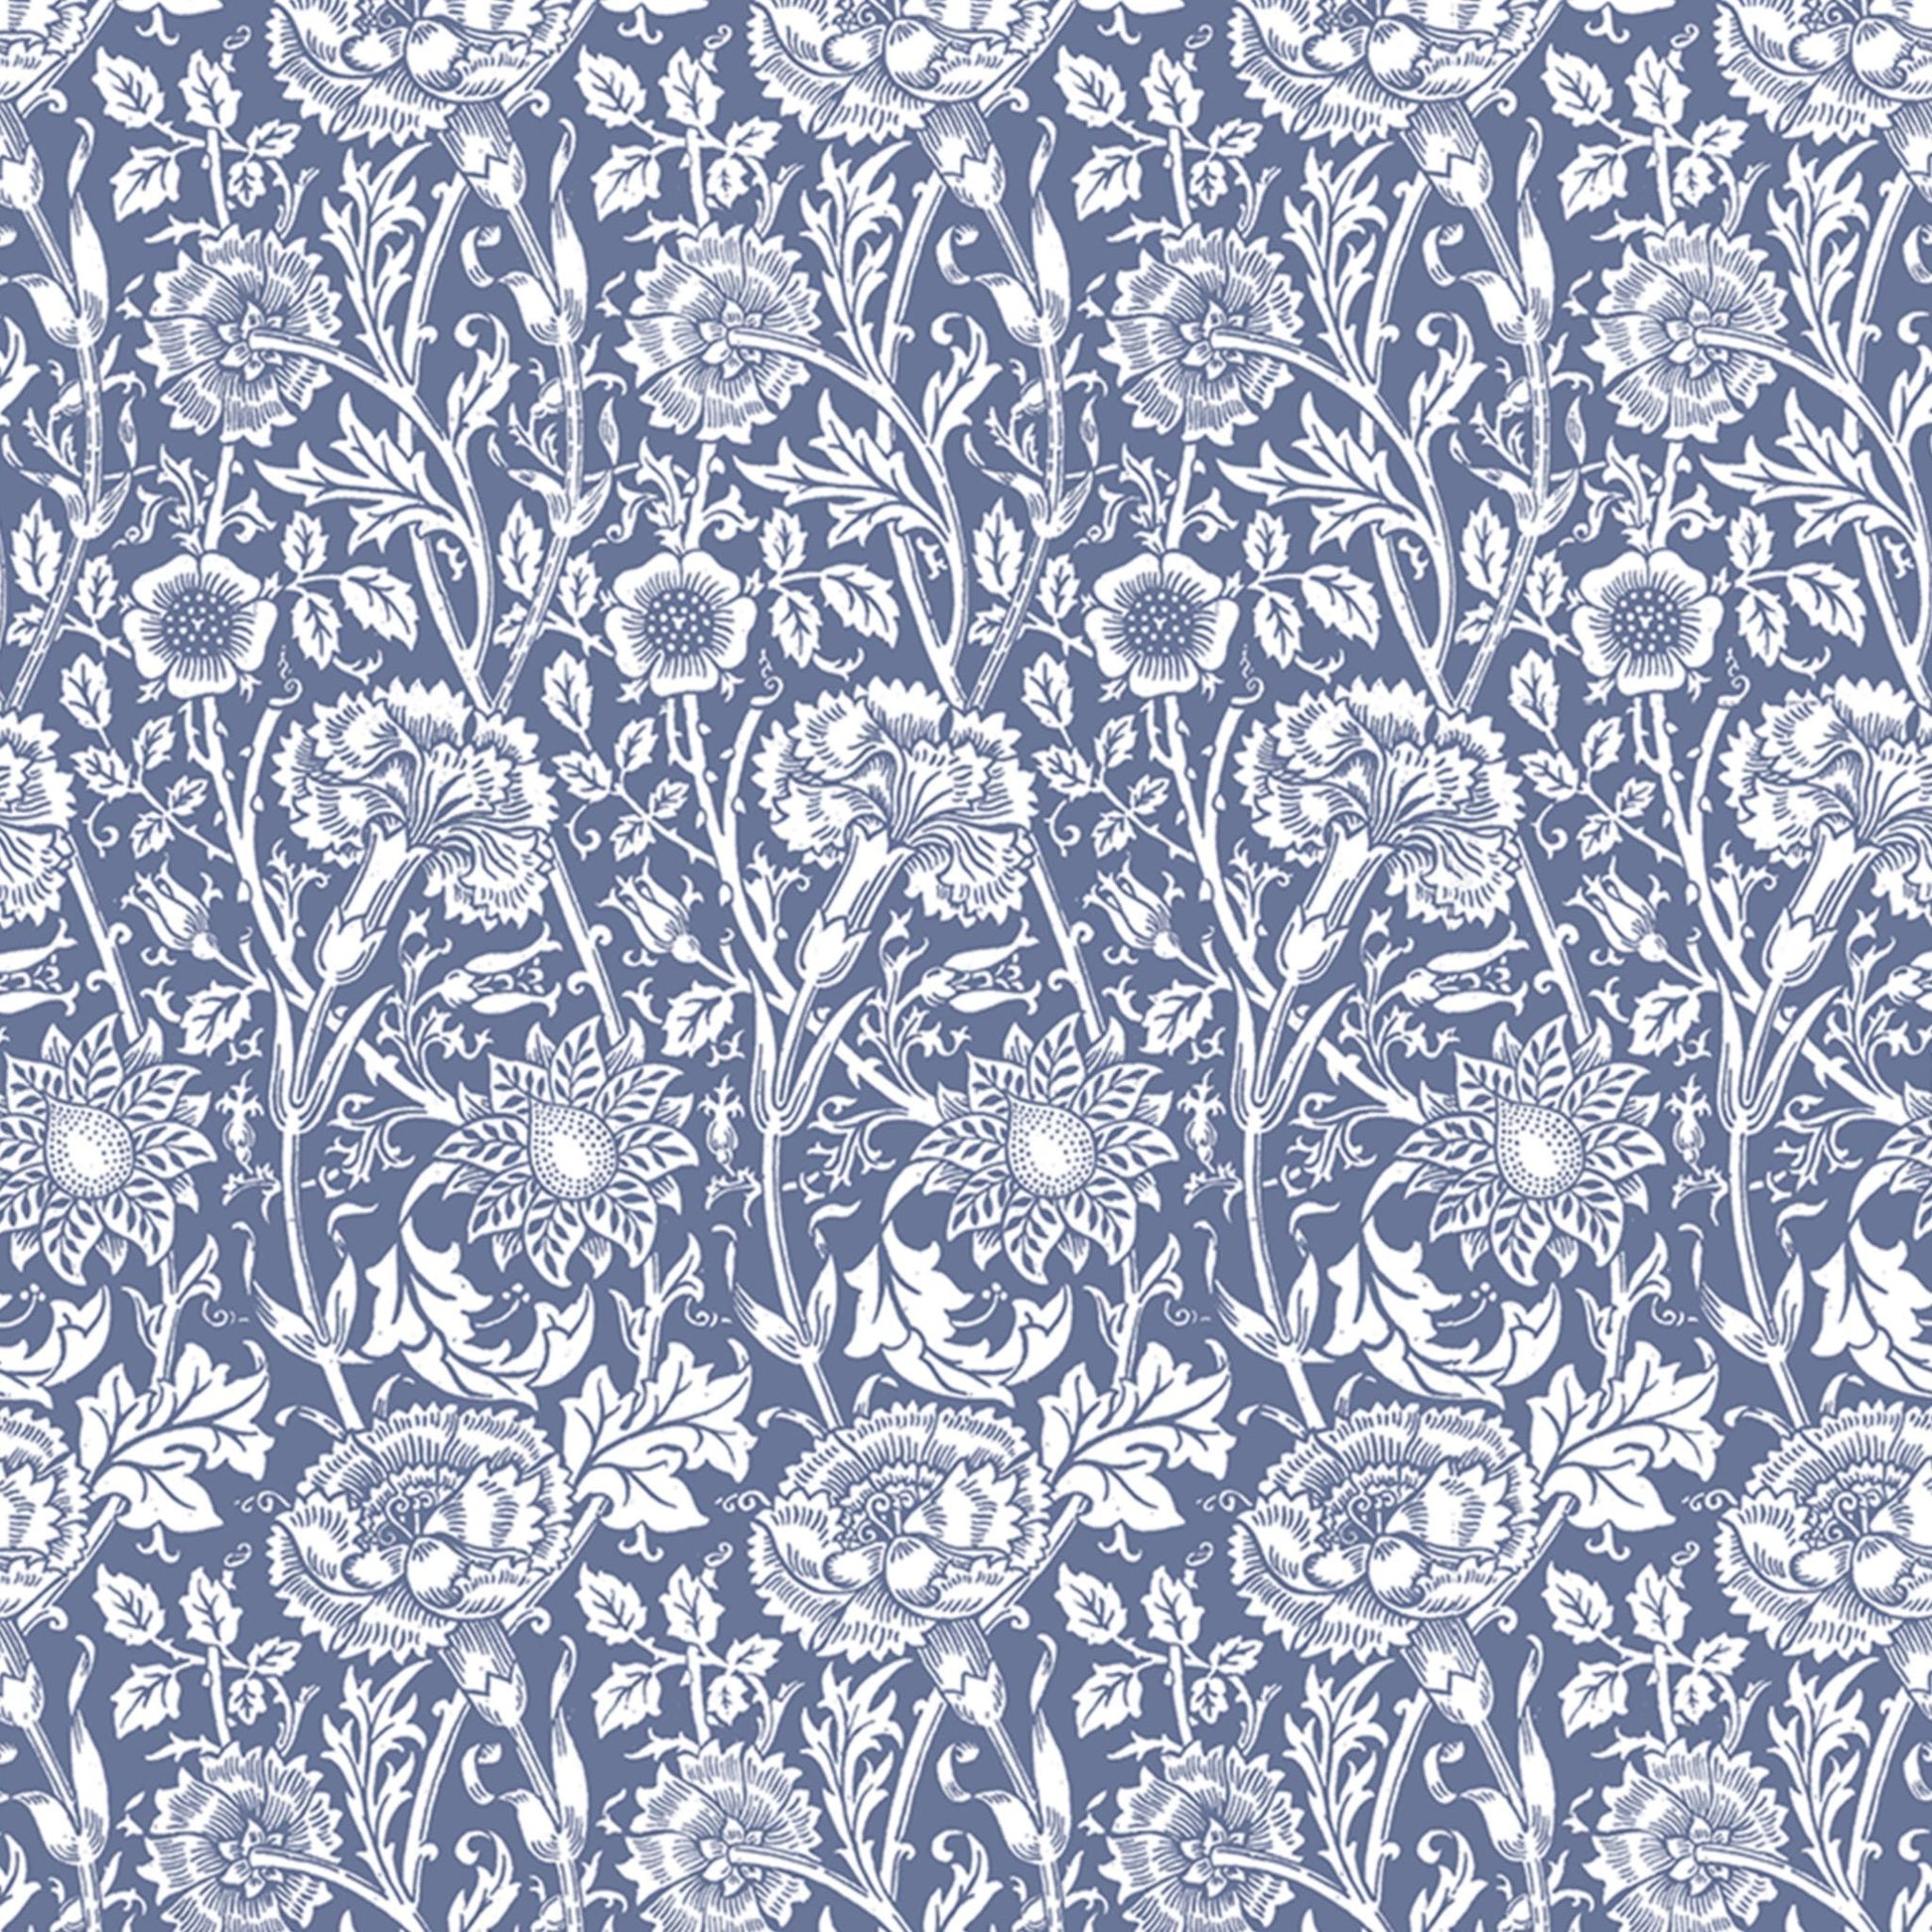 Simply Drawer Liners LAVENDER fragrance SCENTED Drawer Liners in BLUE William Morris Design. Made in Britain.